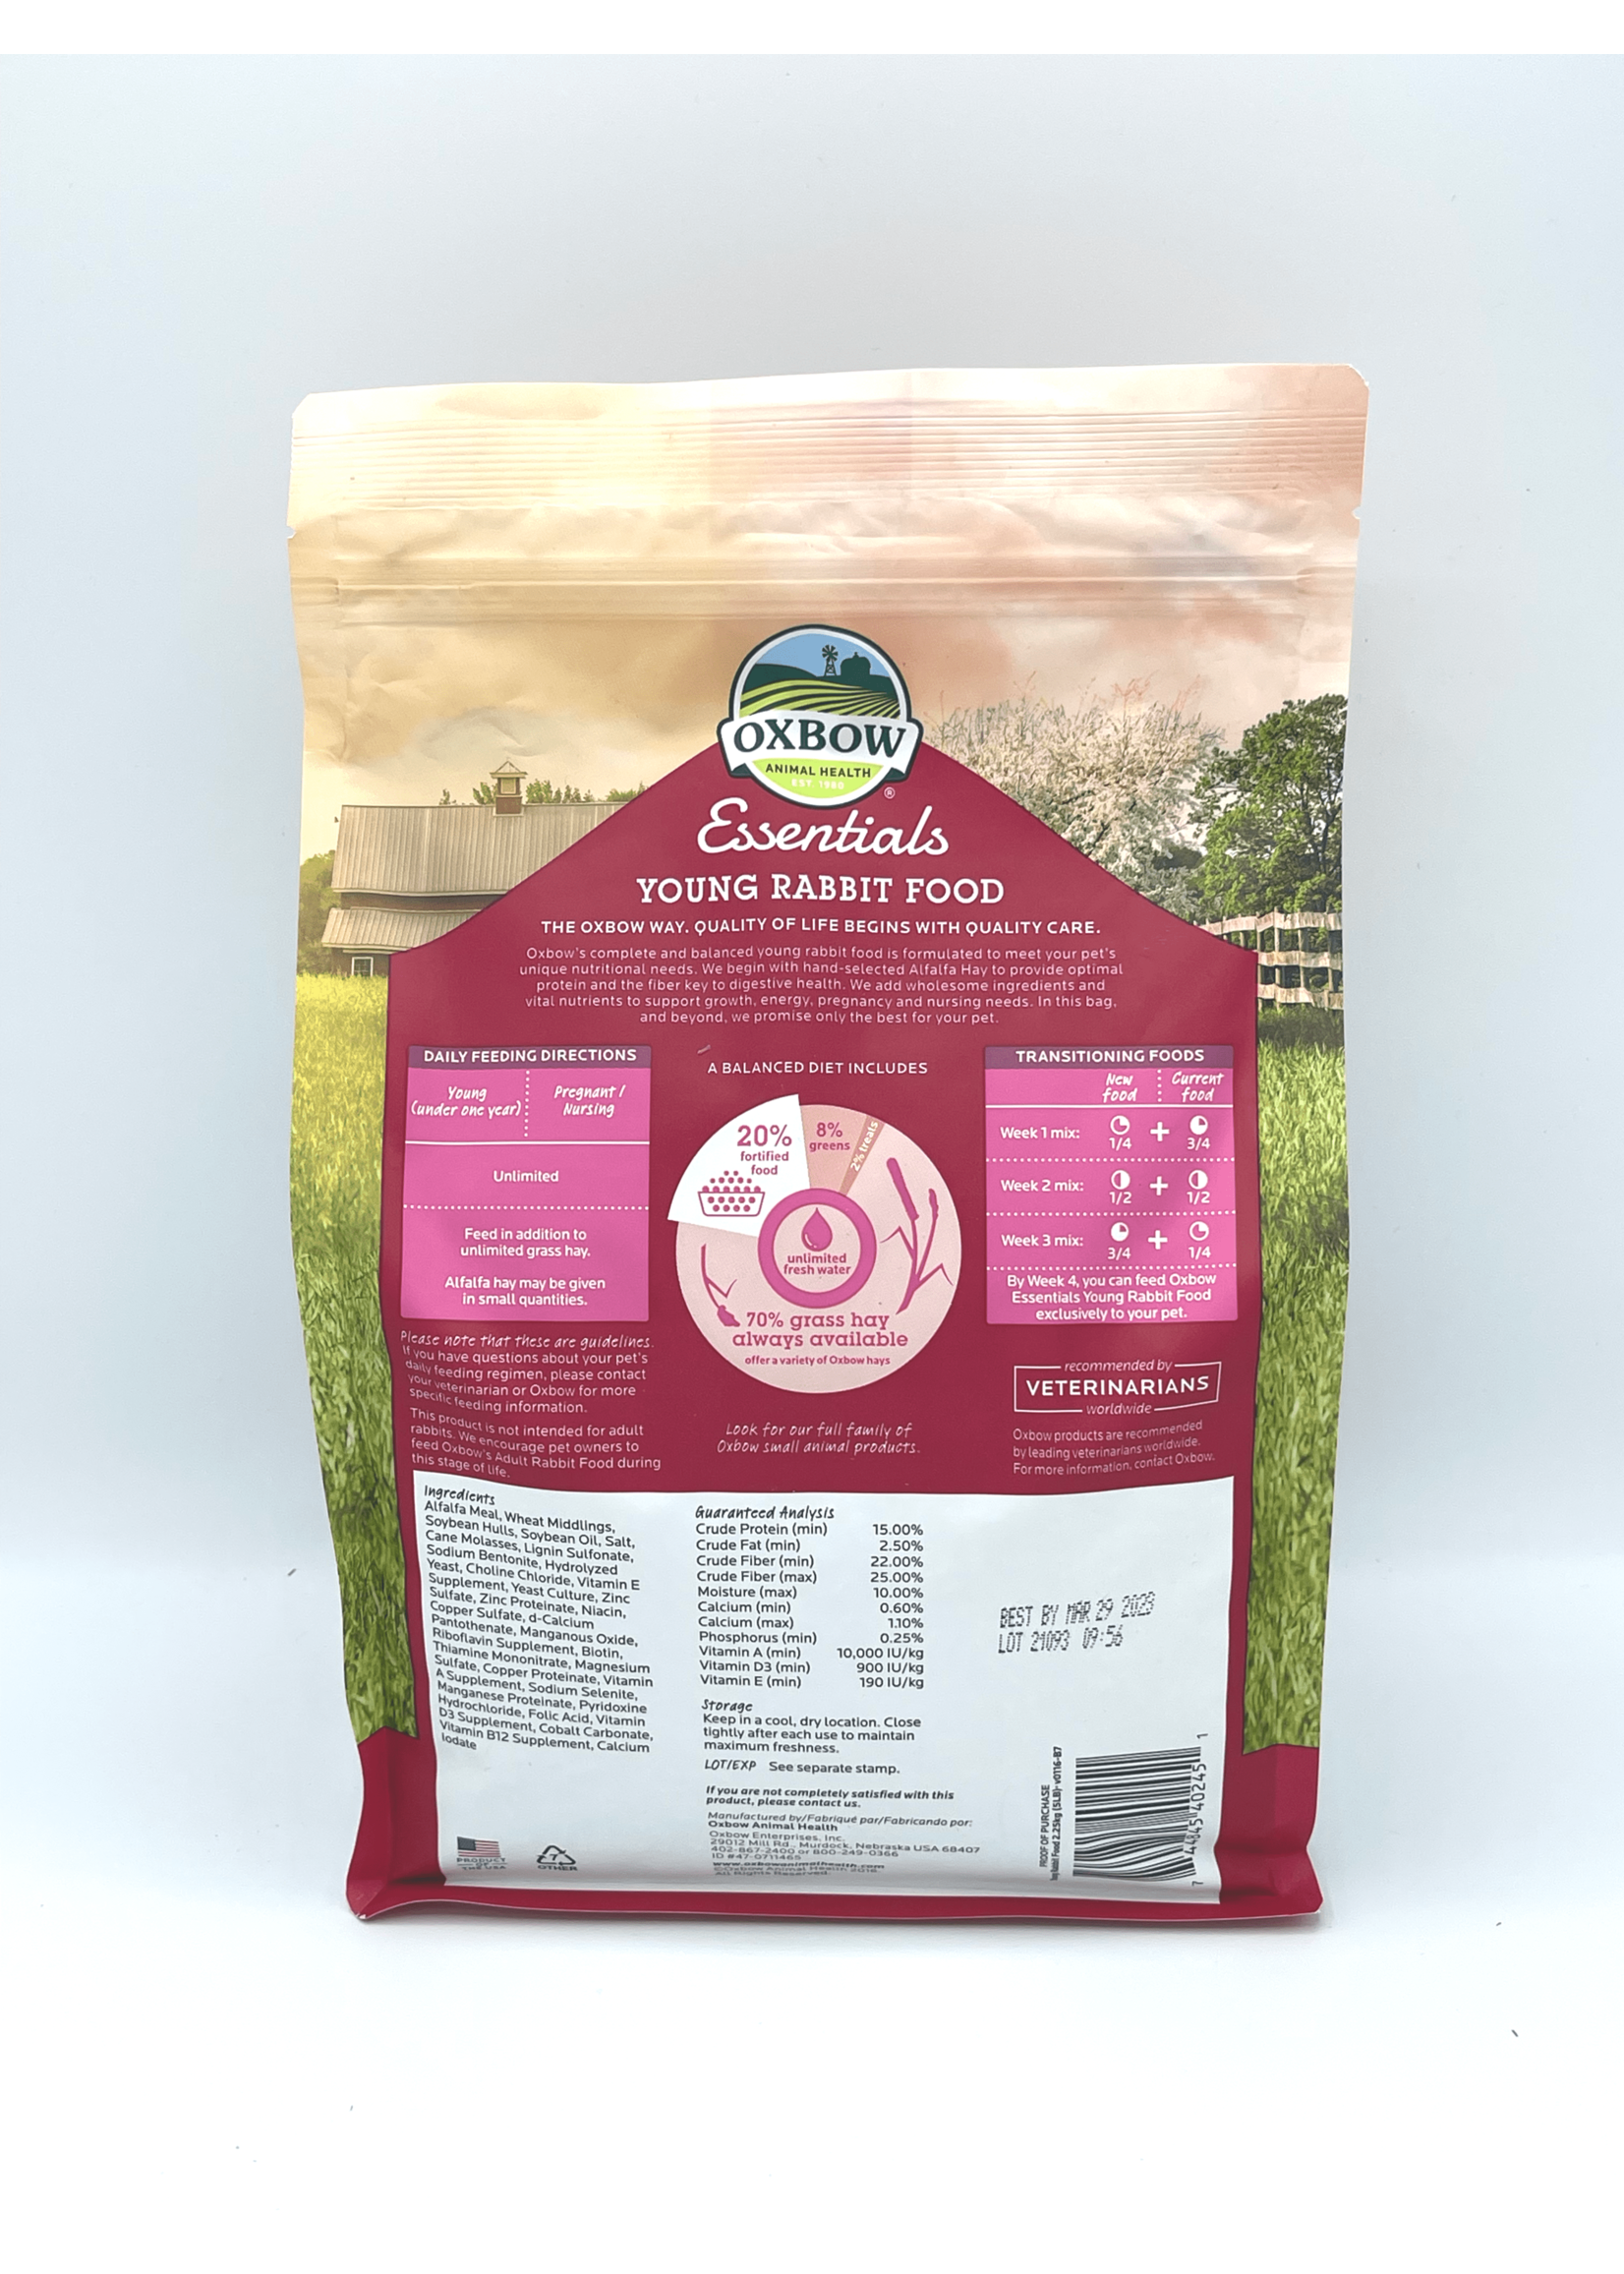 Oxbow Oxbow Essentials Young Rabbit Food, 5lb bag